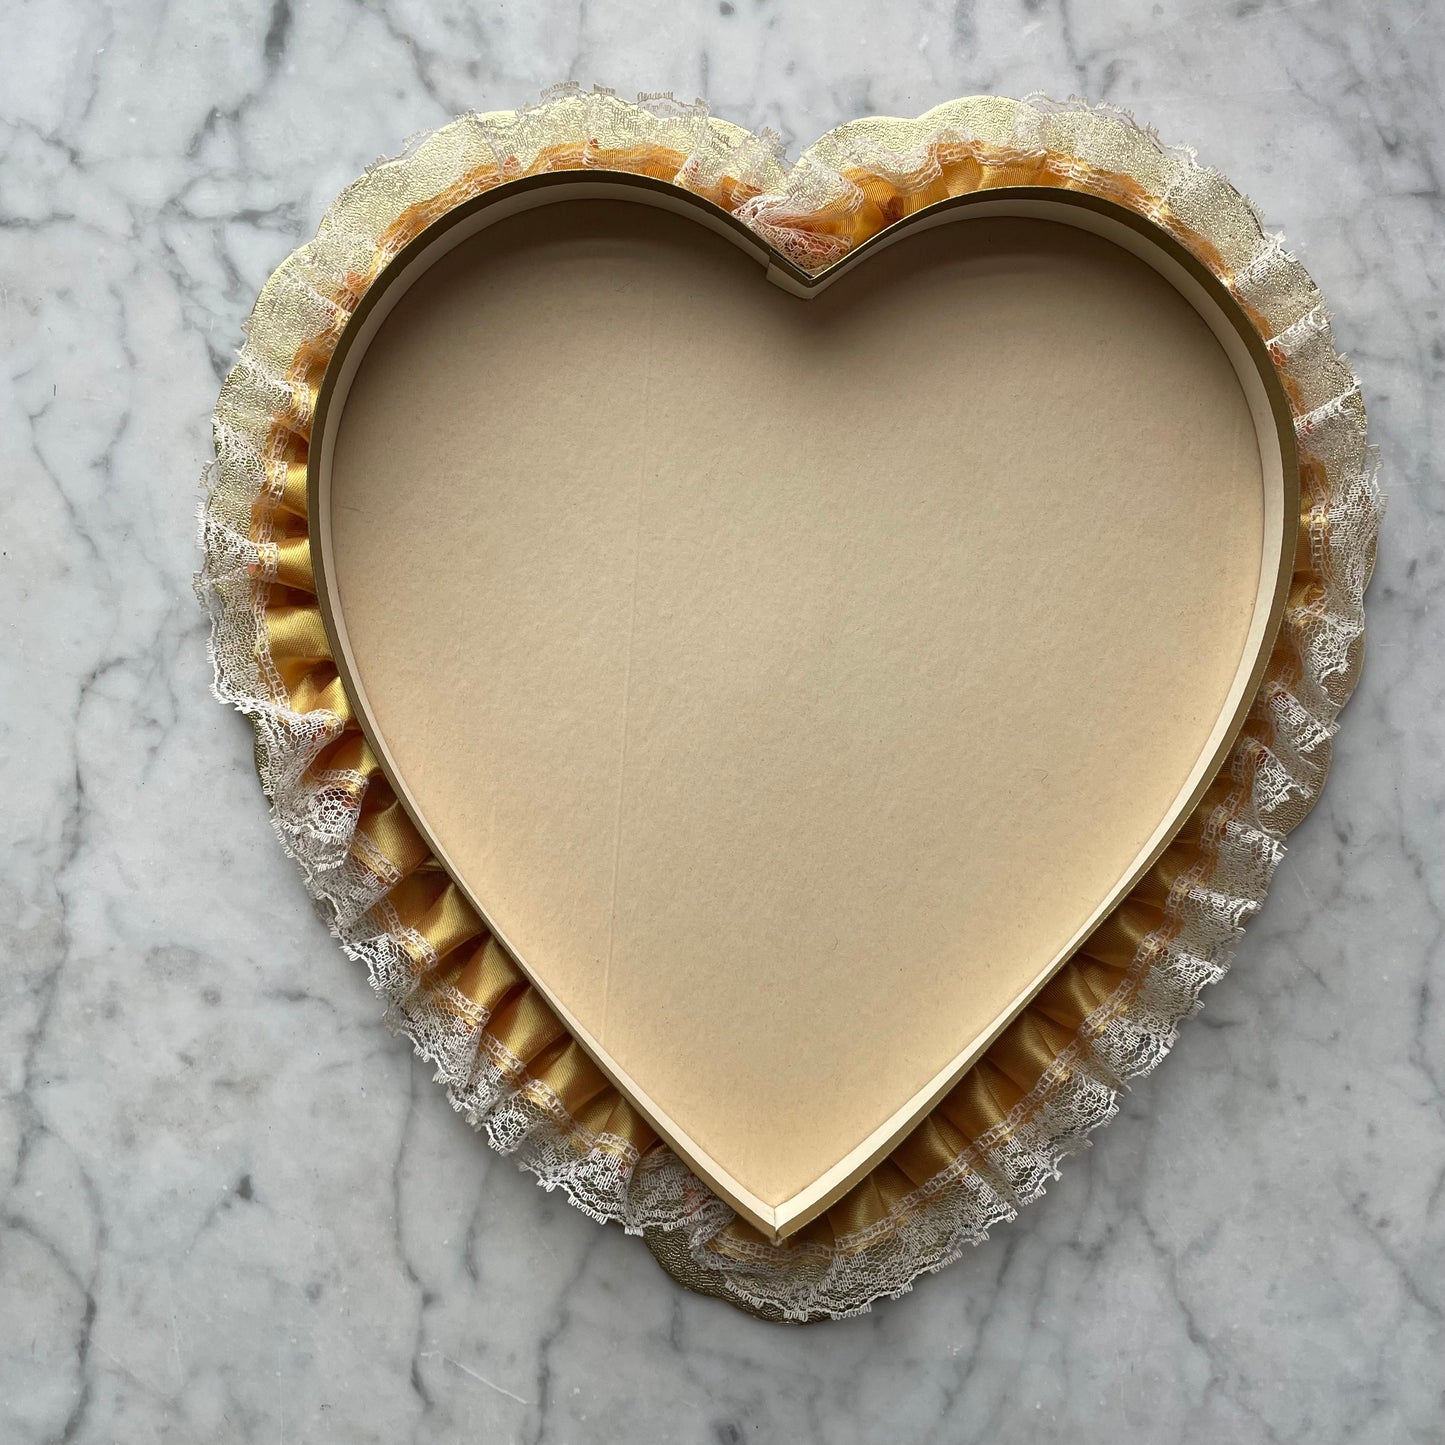 Vintage Heart Shaped Candy Box